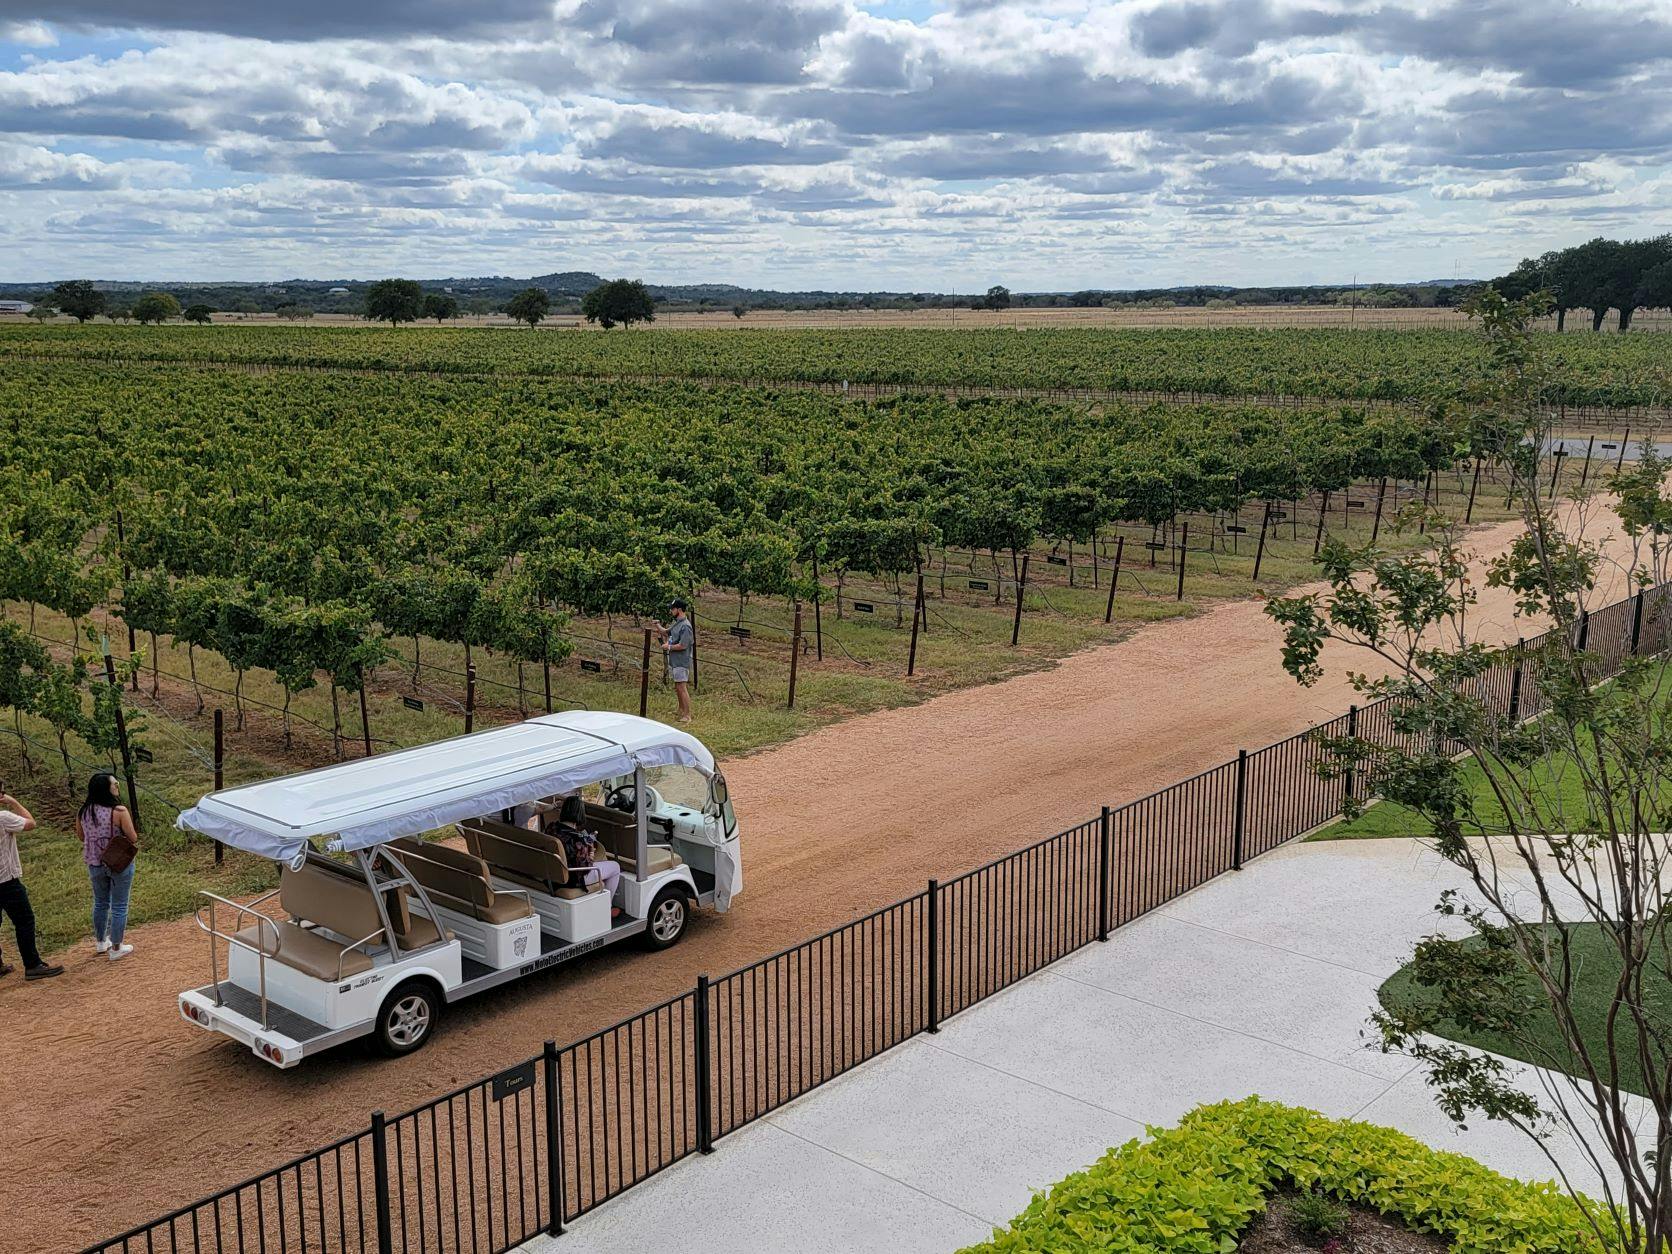 Augusta Vin launched the Grand Tour highlighting its vineyards and production facility.